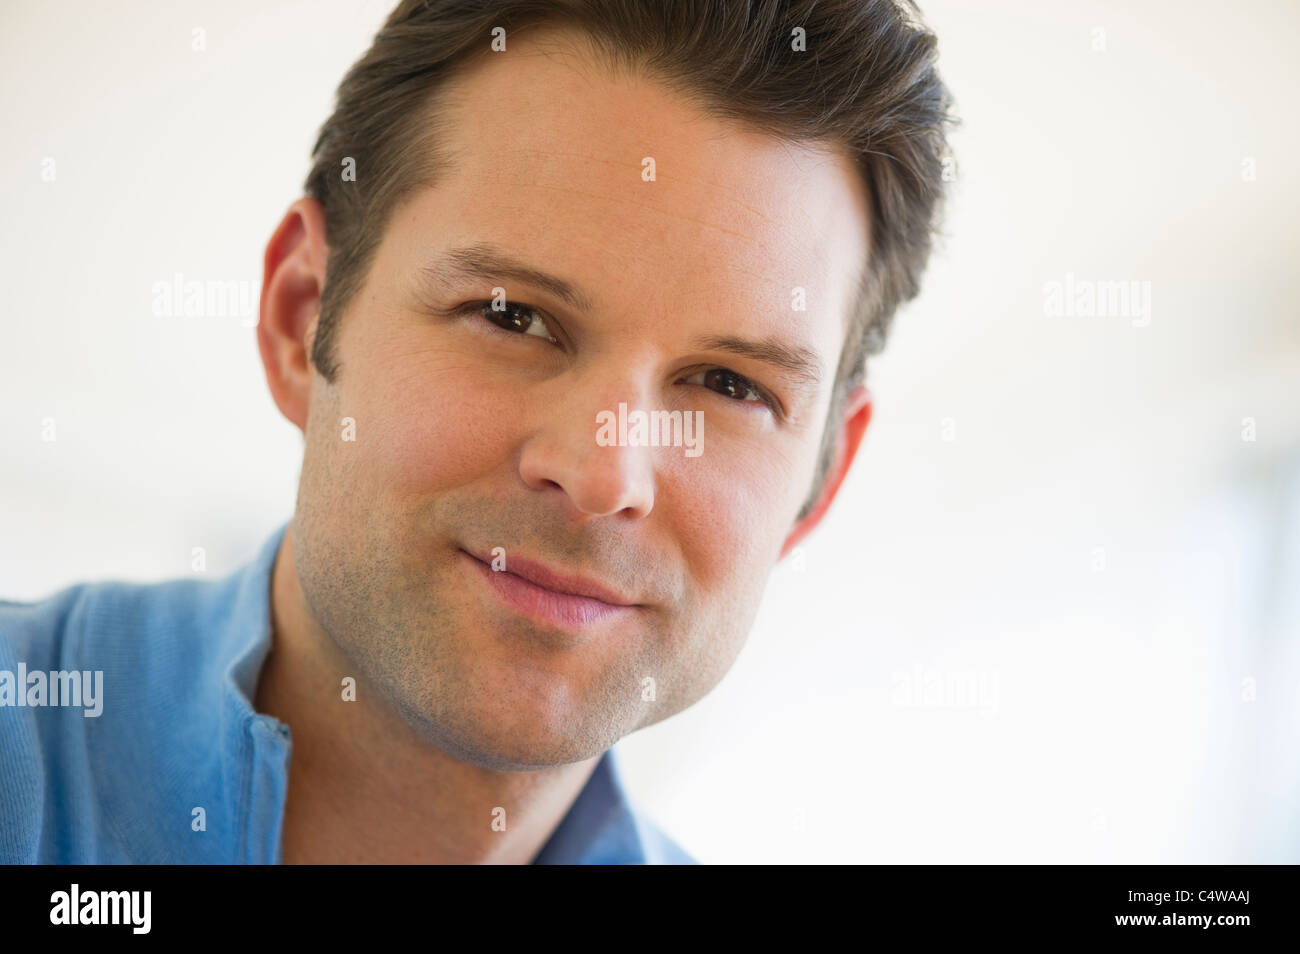 USA, New Jersey, Jersey City, portrait of mid adult man Stock Photo